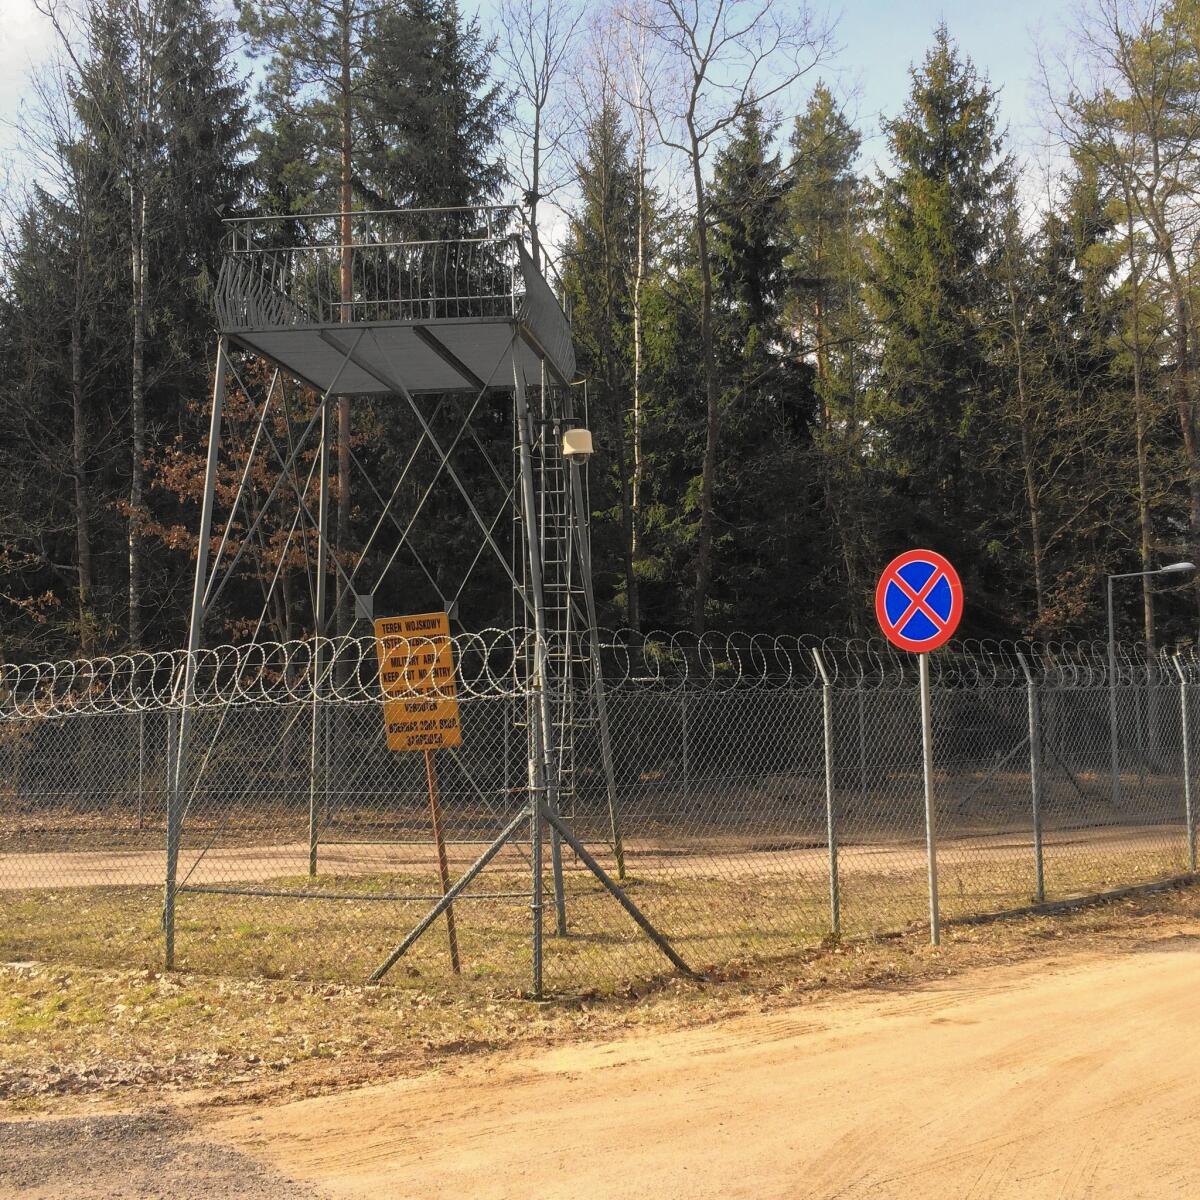 A remote intelligence training base in Stare Kiejkuty, Poland, was used by the CIA to interrogate terrorism suspects in late 2002 and 2003.